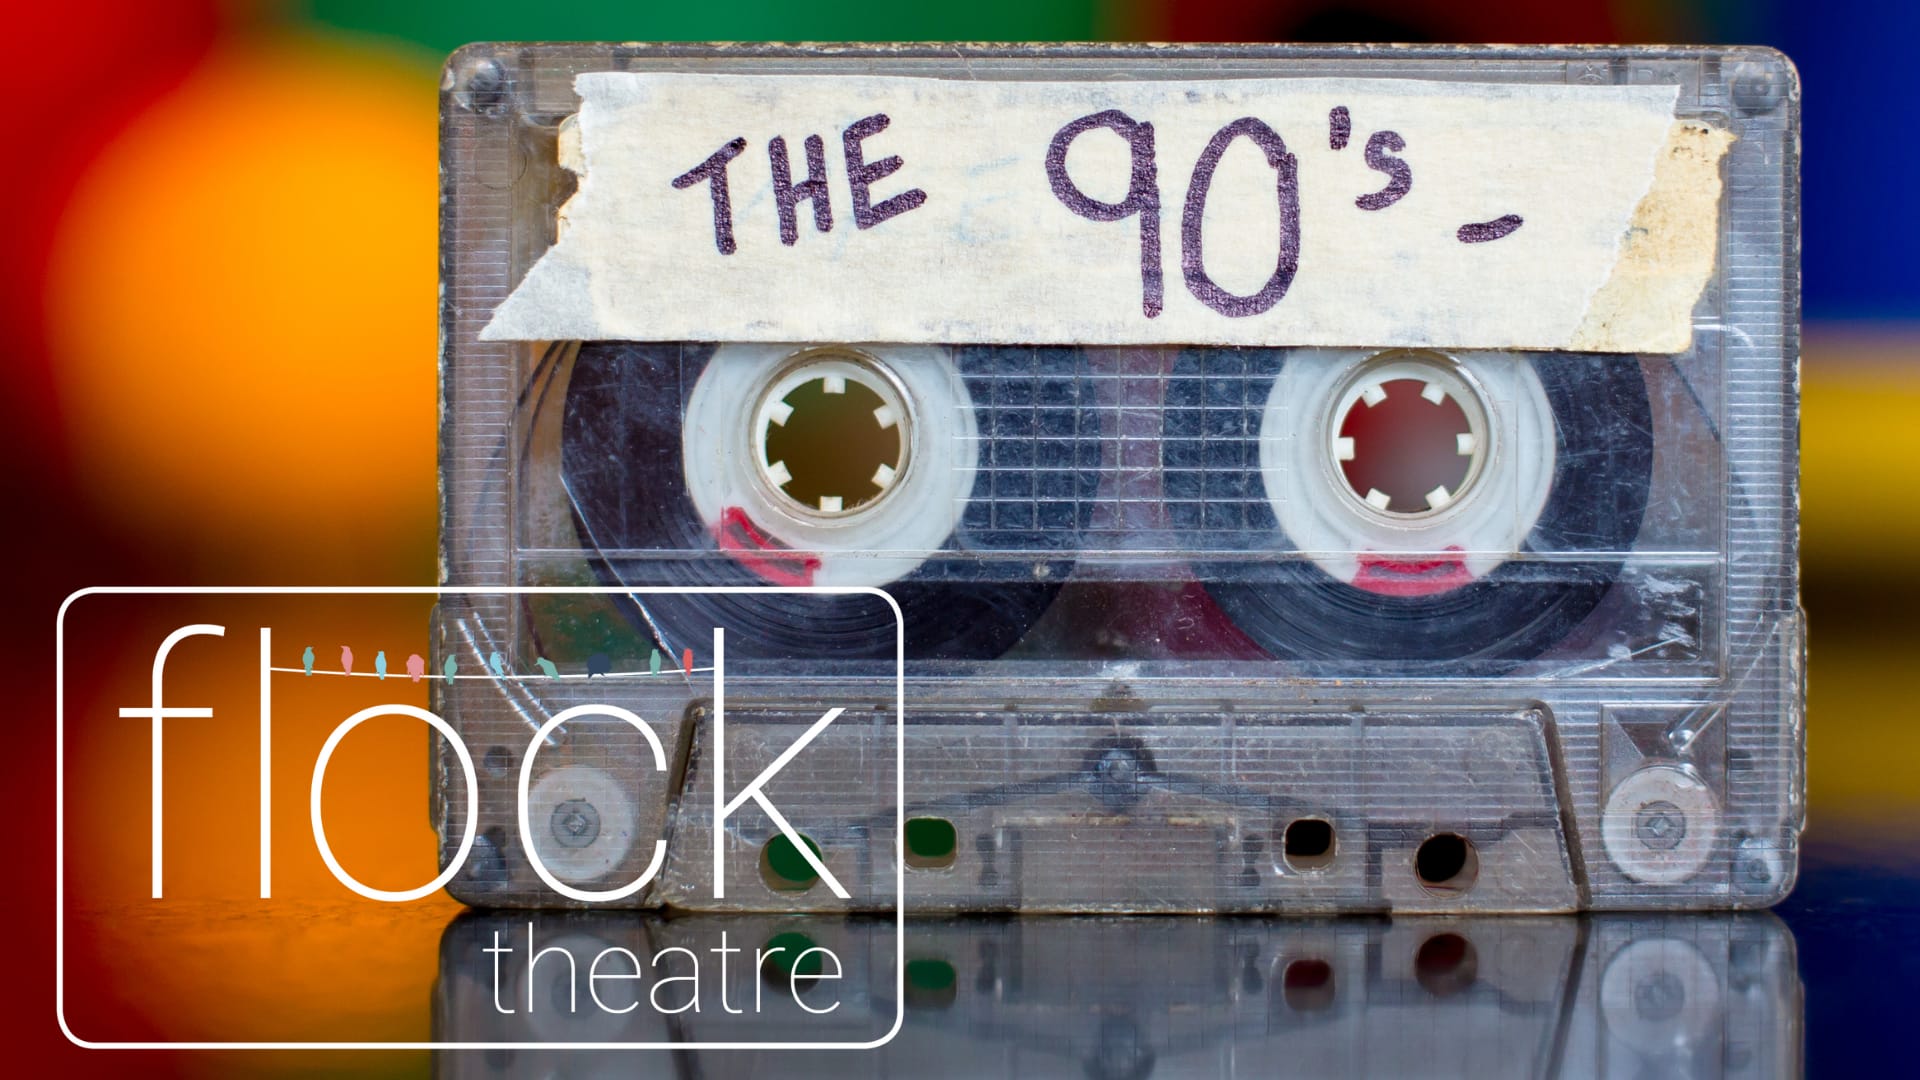 A cassette tape with a white sticker where it's written The 90s on a colorful background and the Flock logo.